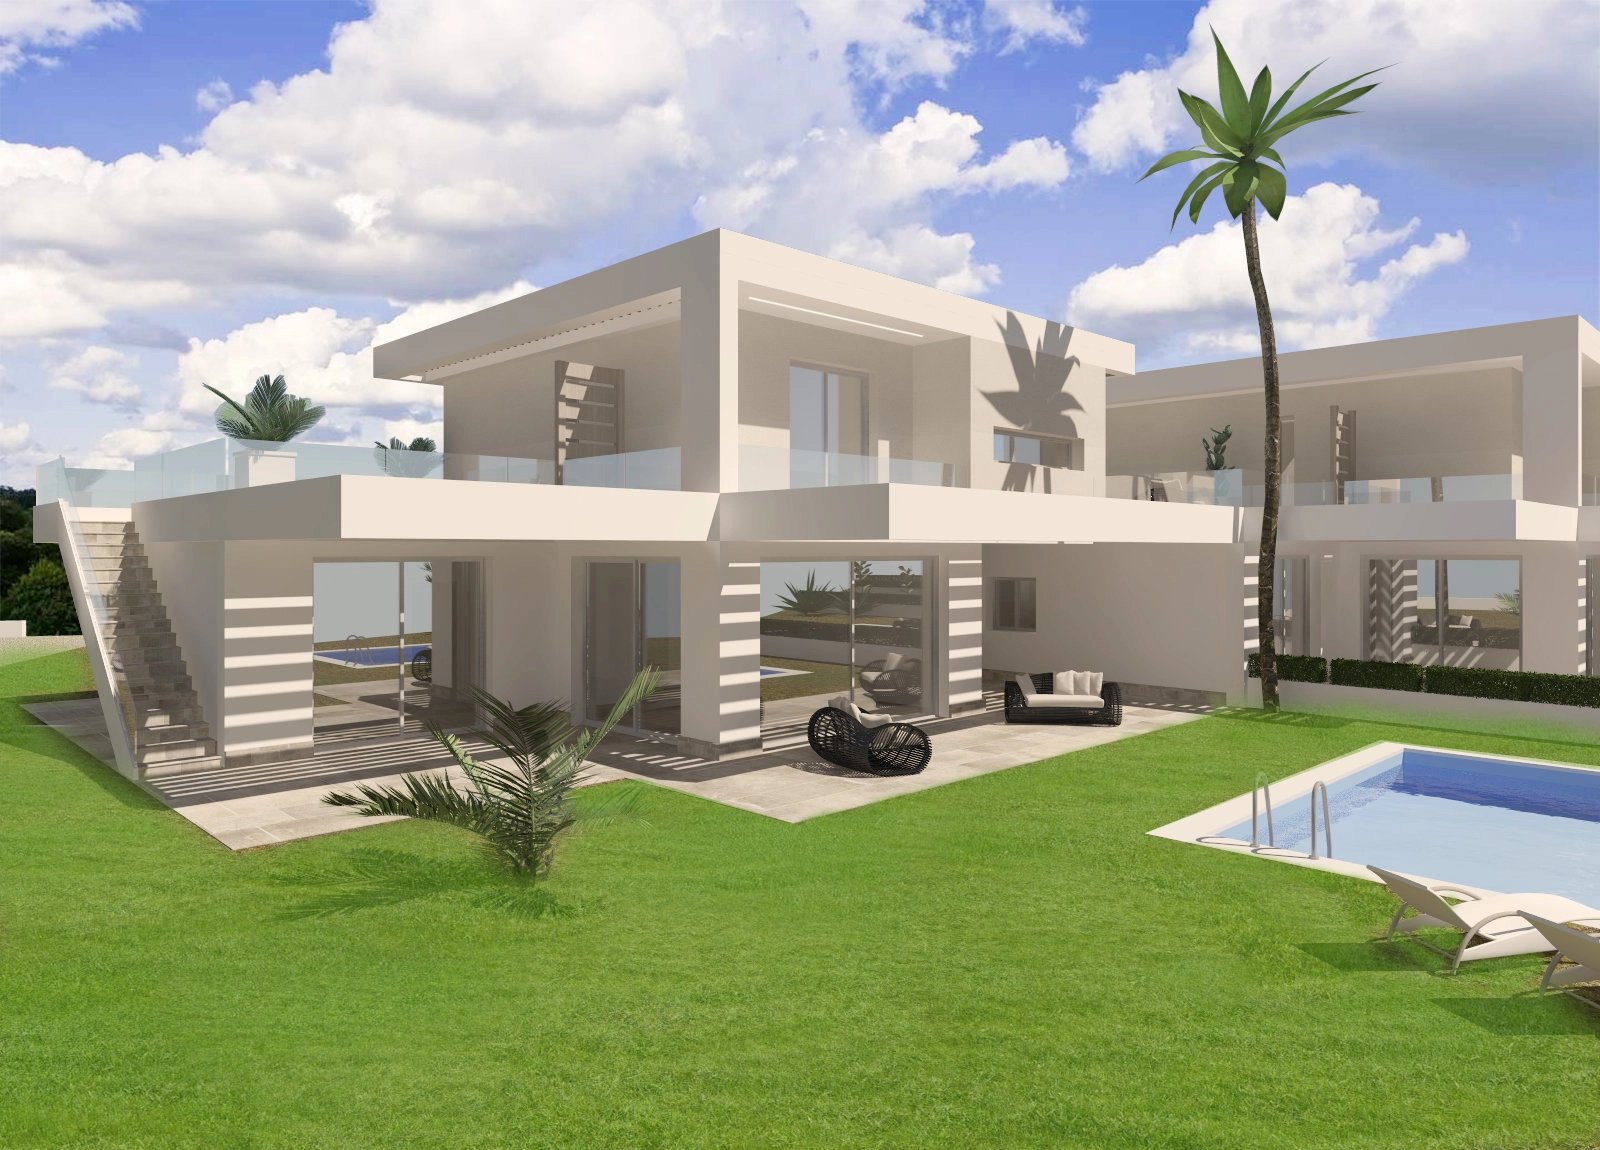 Villa with beach access - pool possible